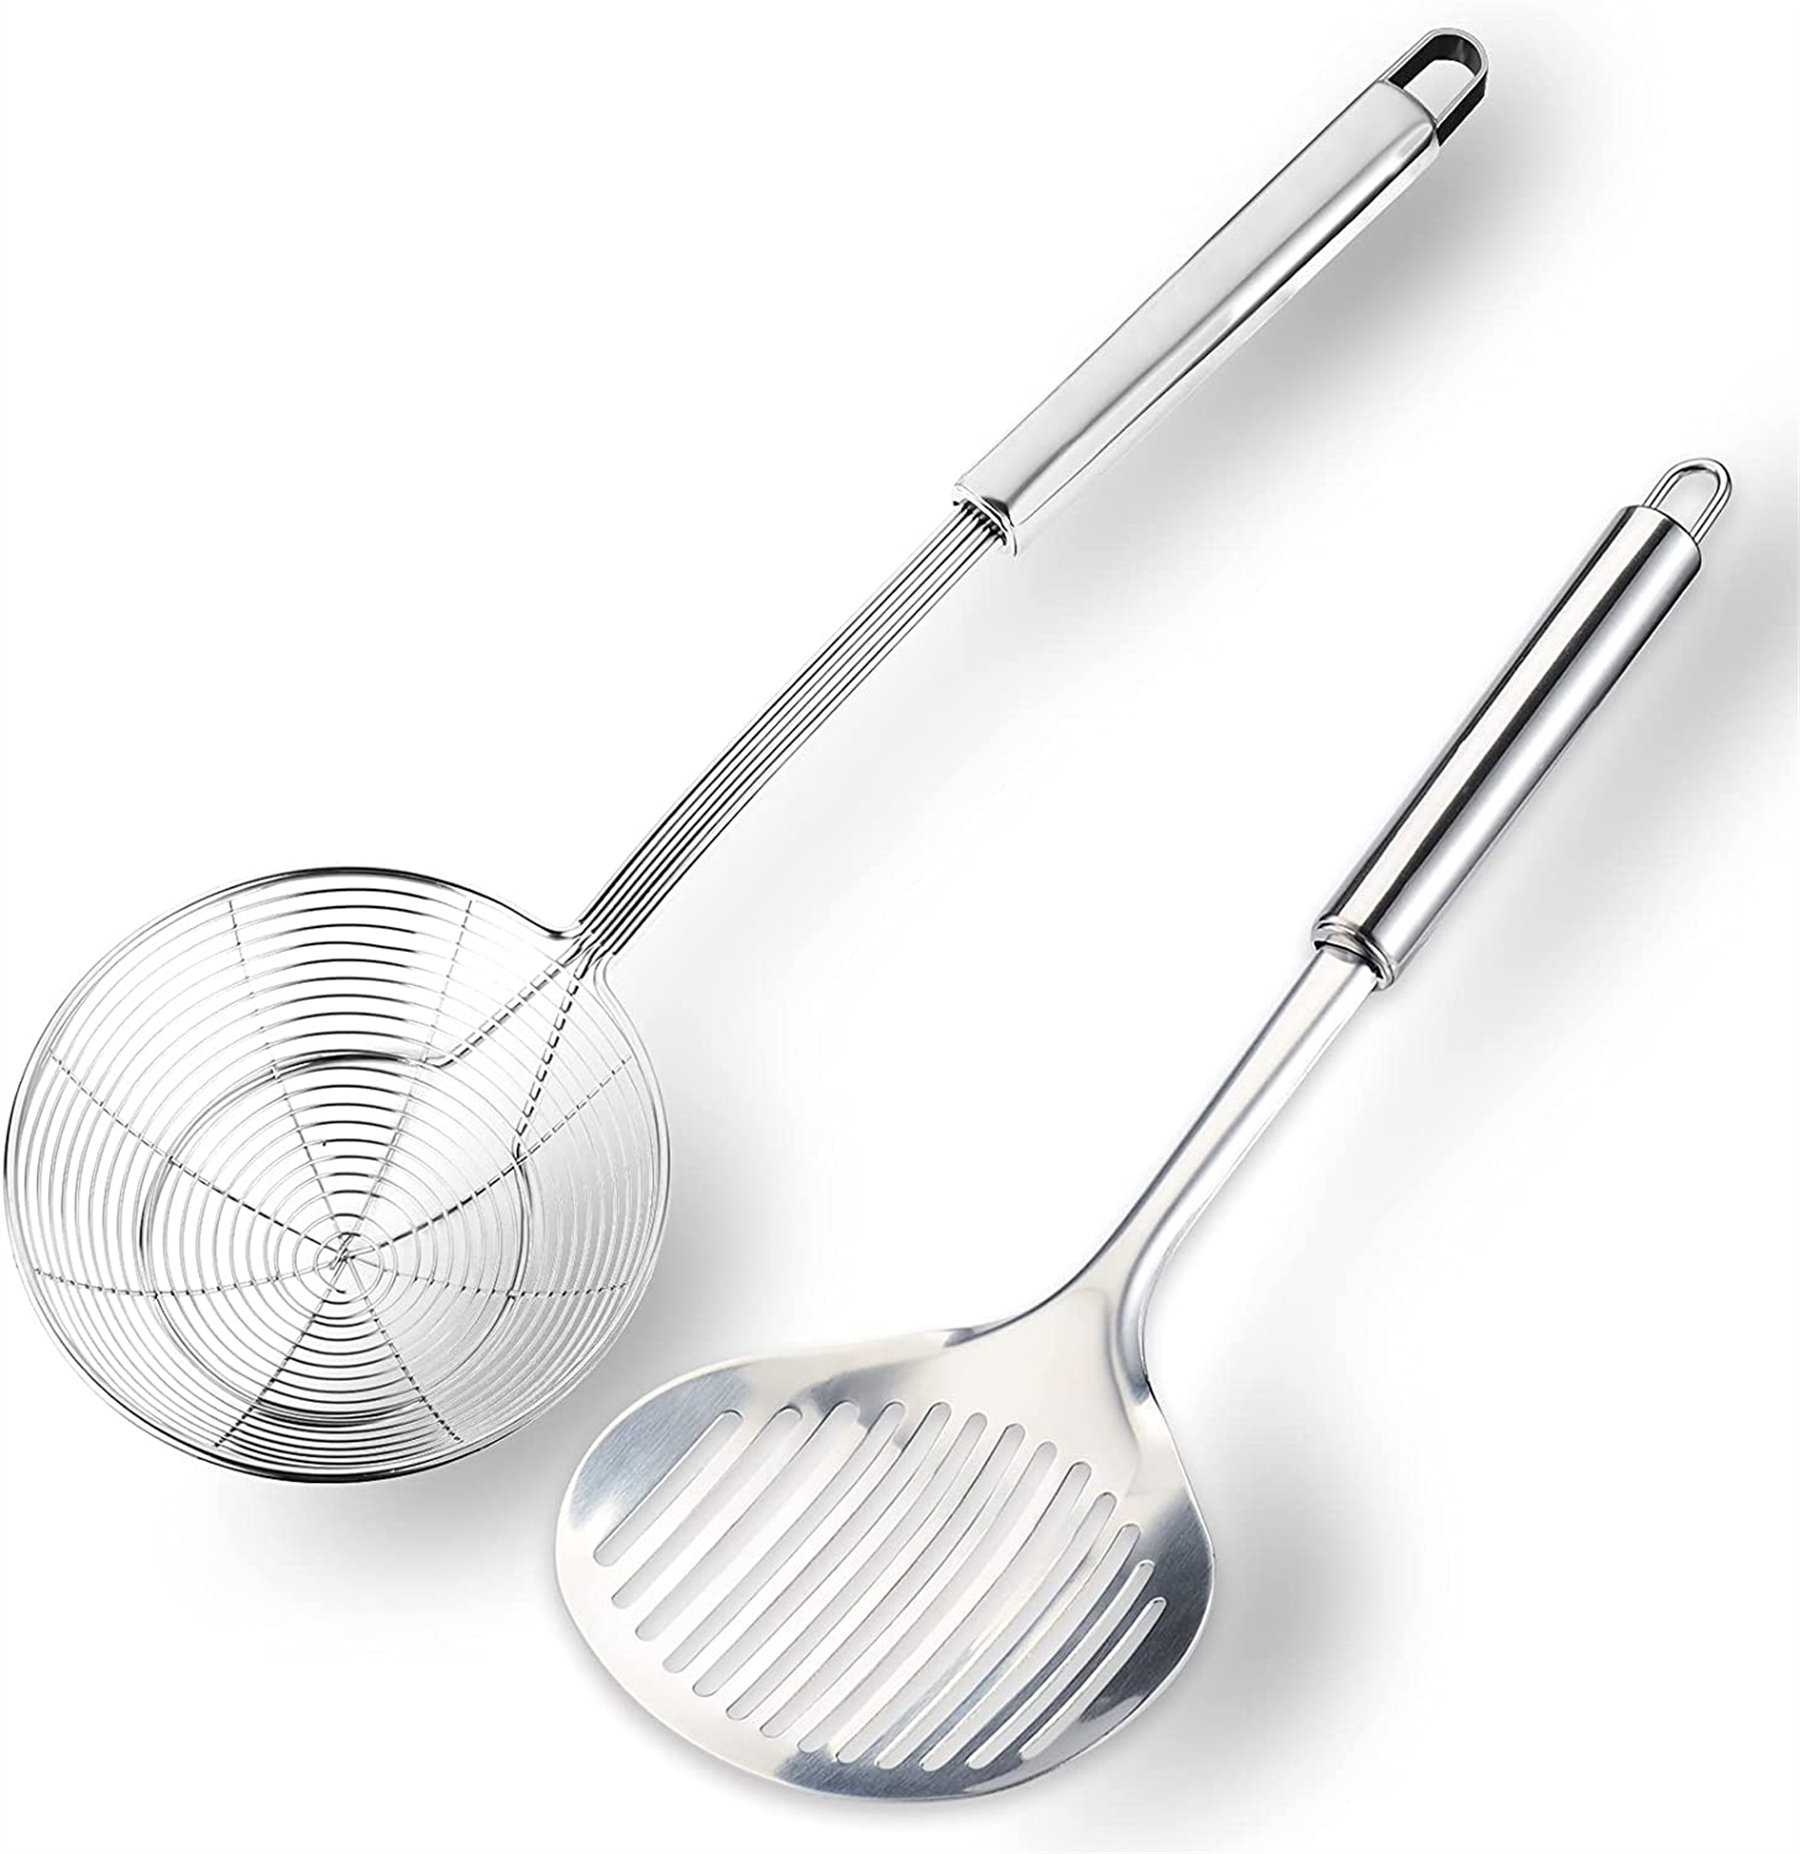 Stainless Steel Slotted Serving Spoon Perforated Filter Ladle Skimmer Strainer 